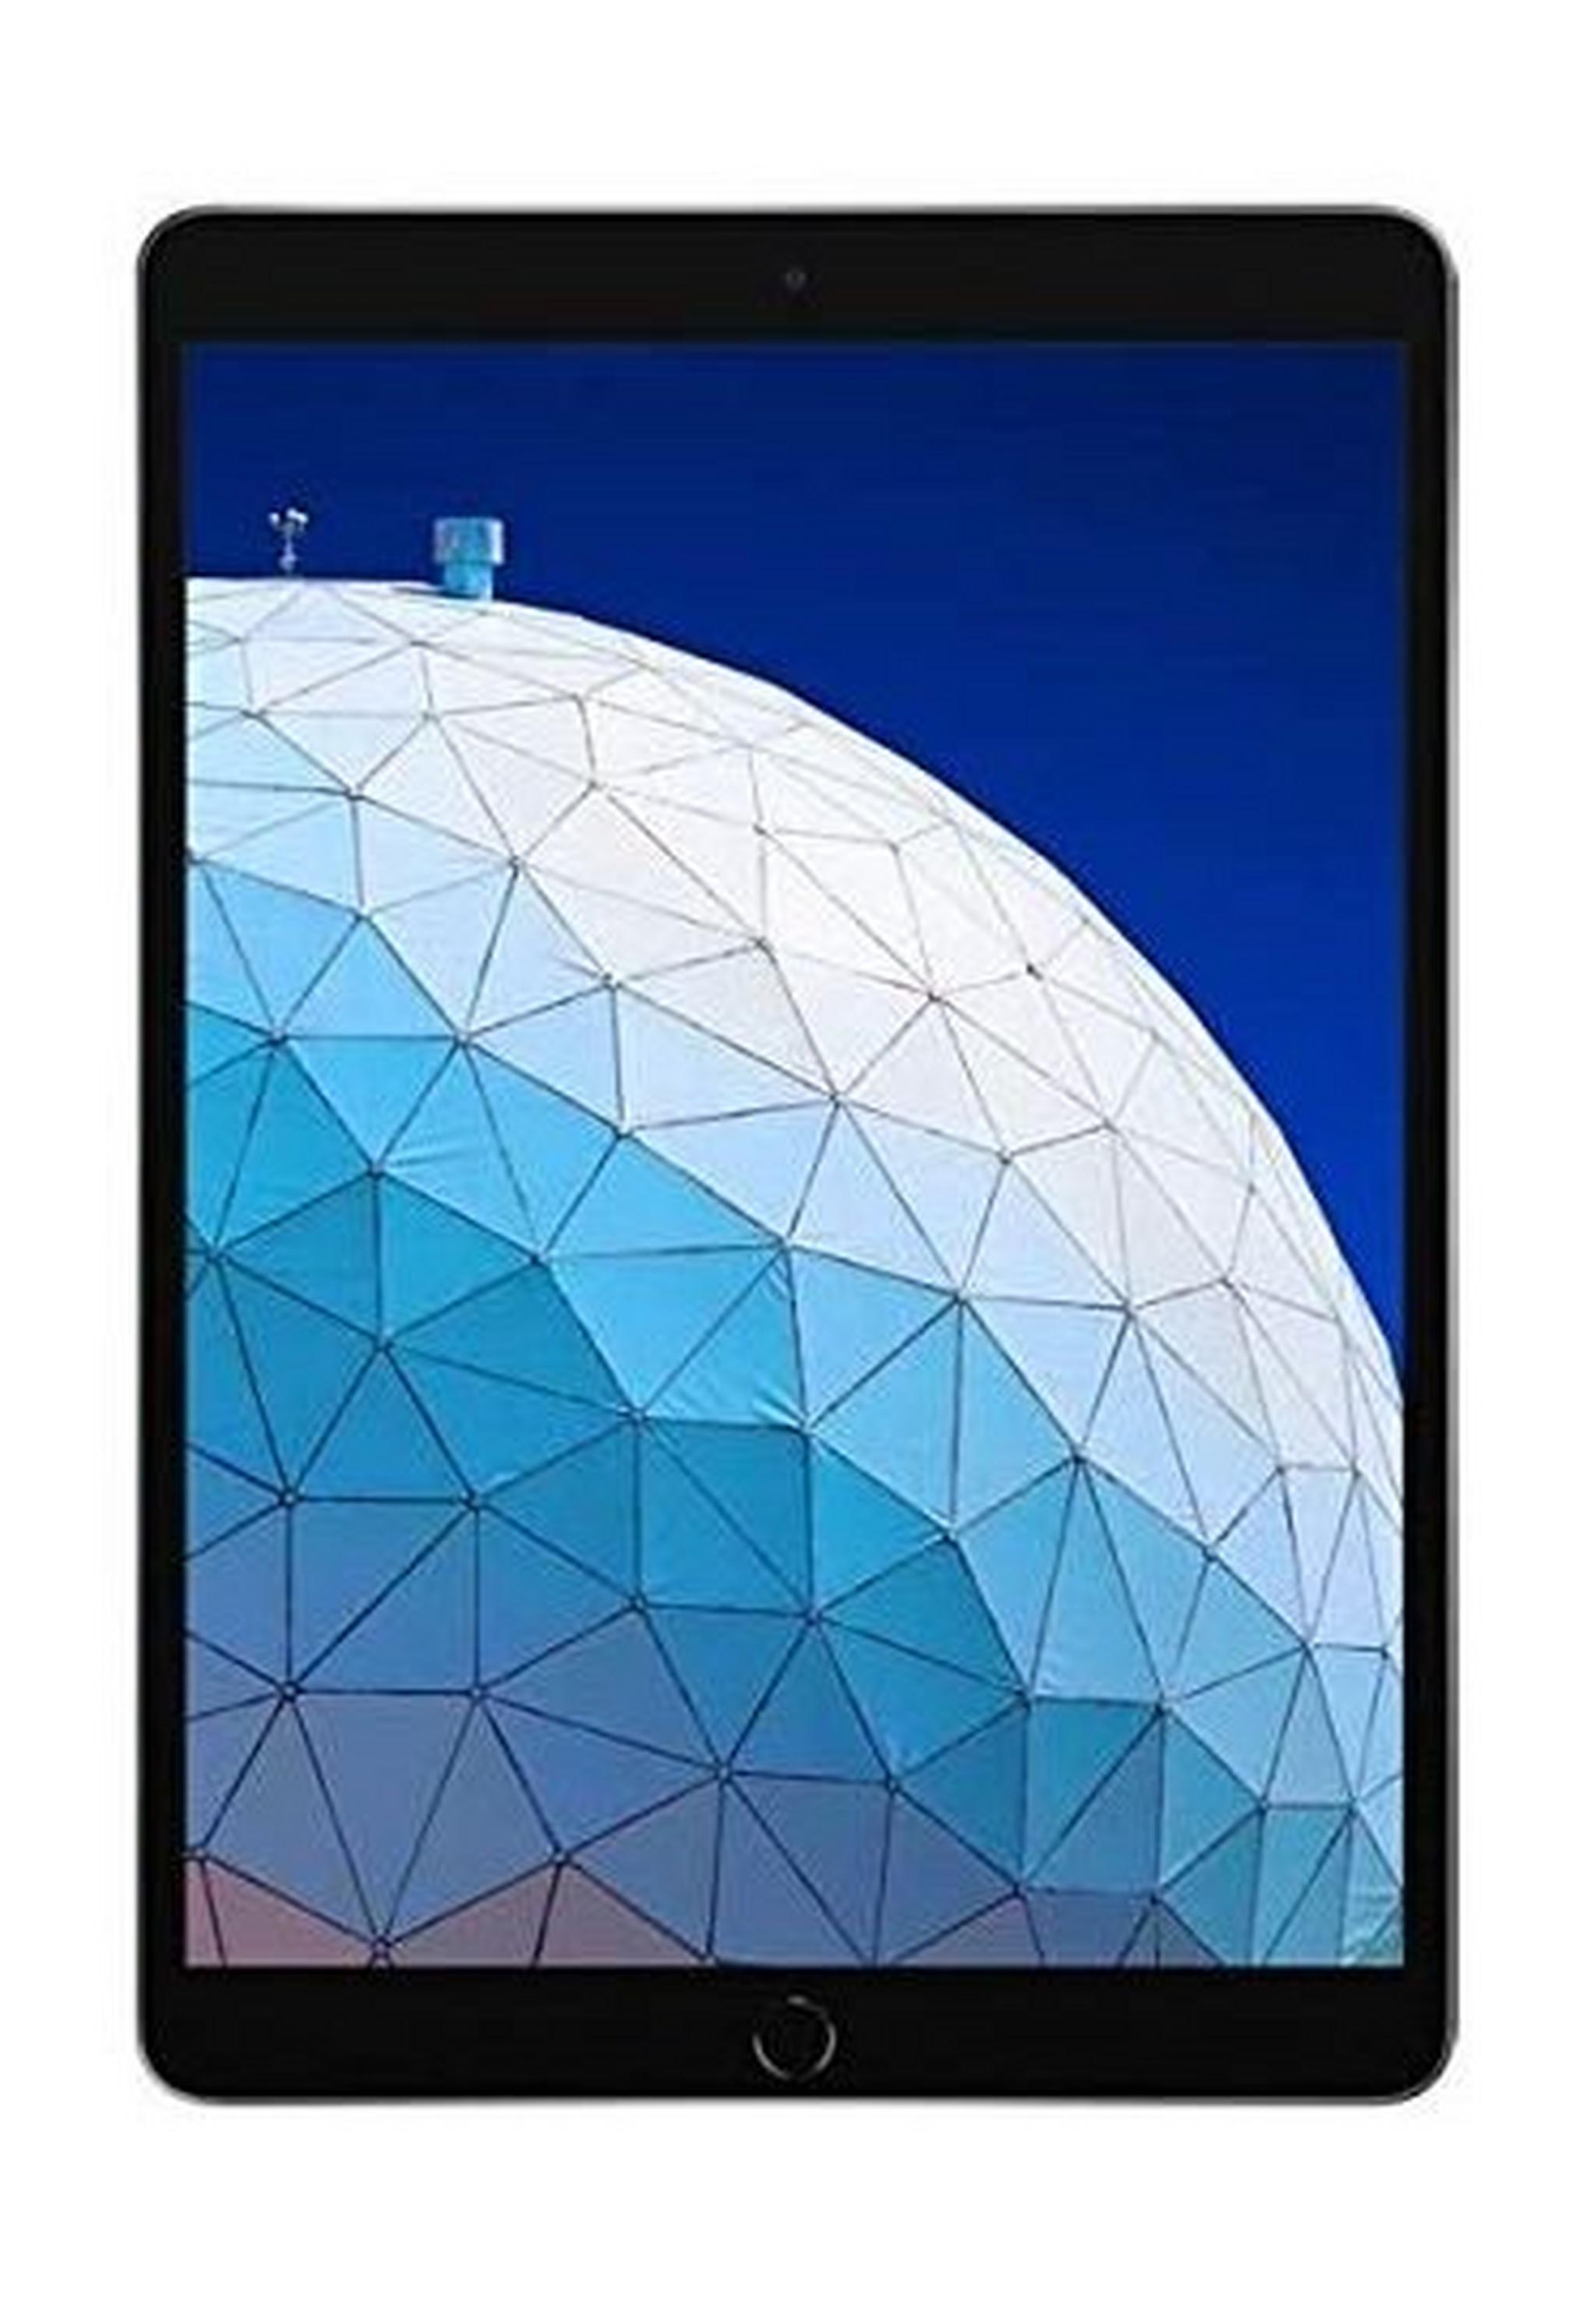 Apple iPad Air 2019 10.5-inch 64GB Wi-Fi Only Tablet - Space Grey